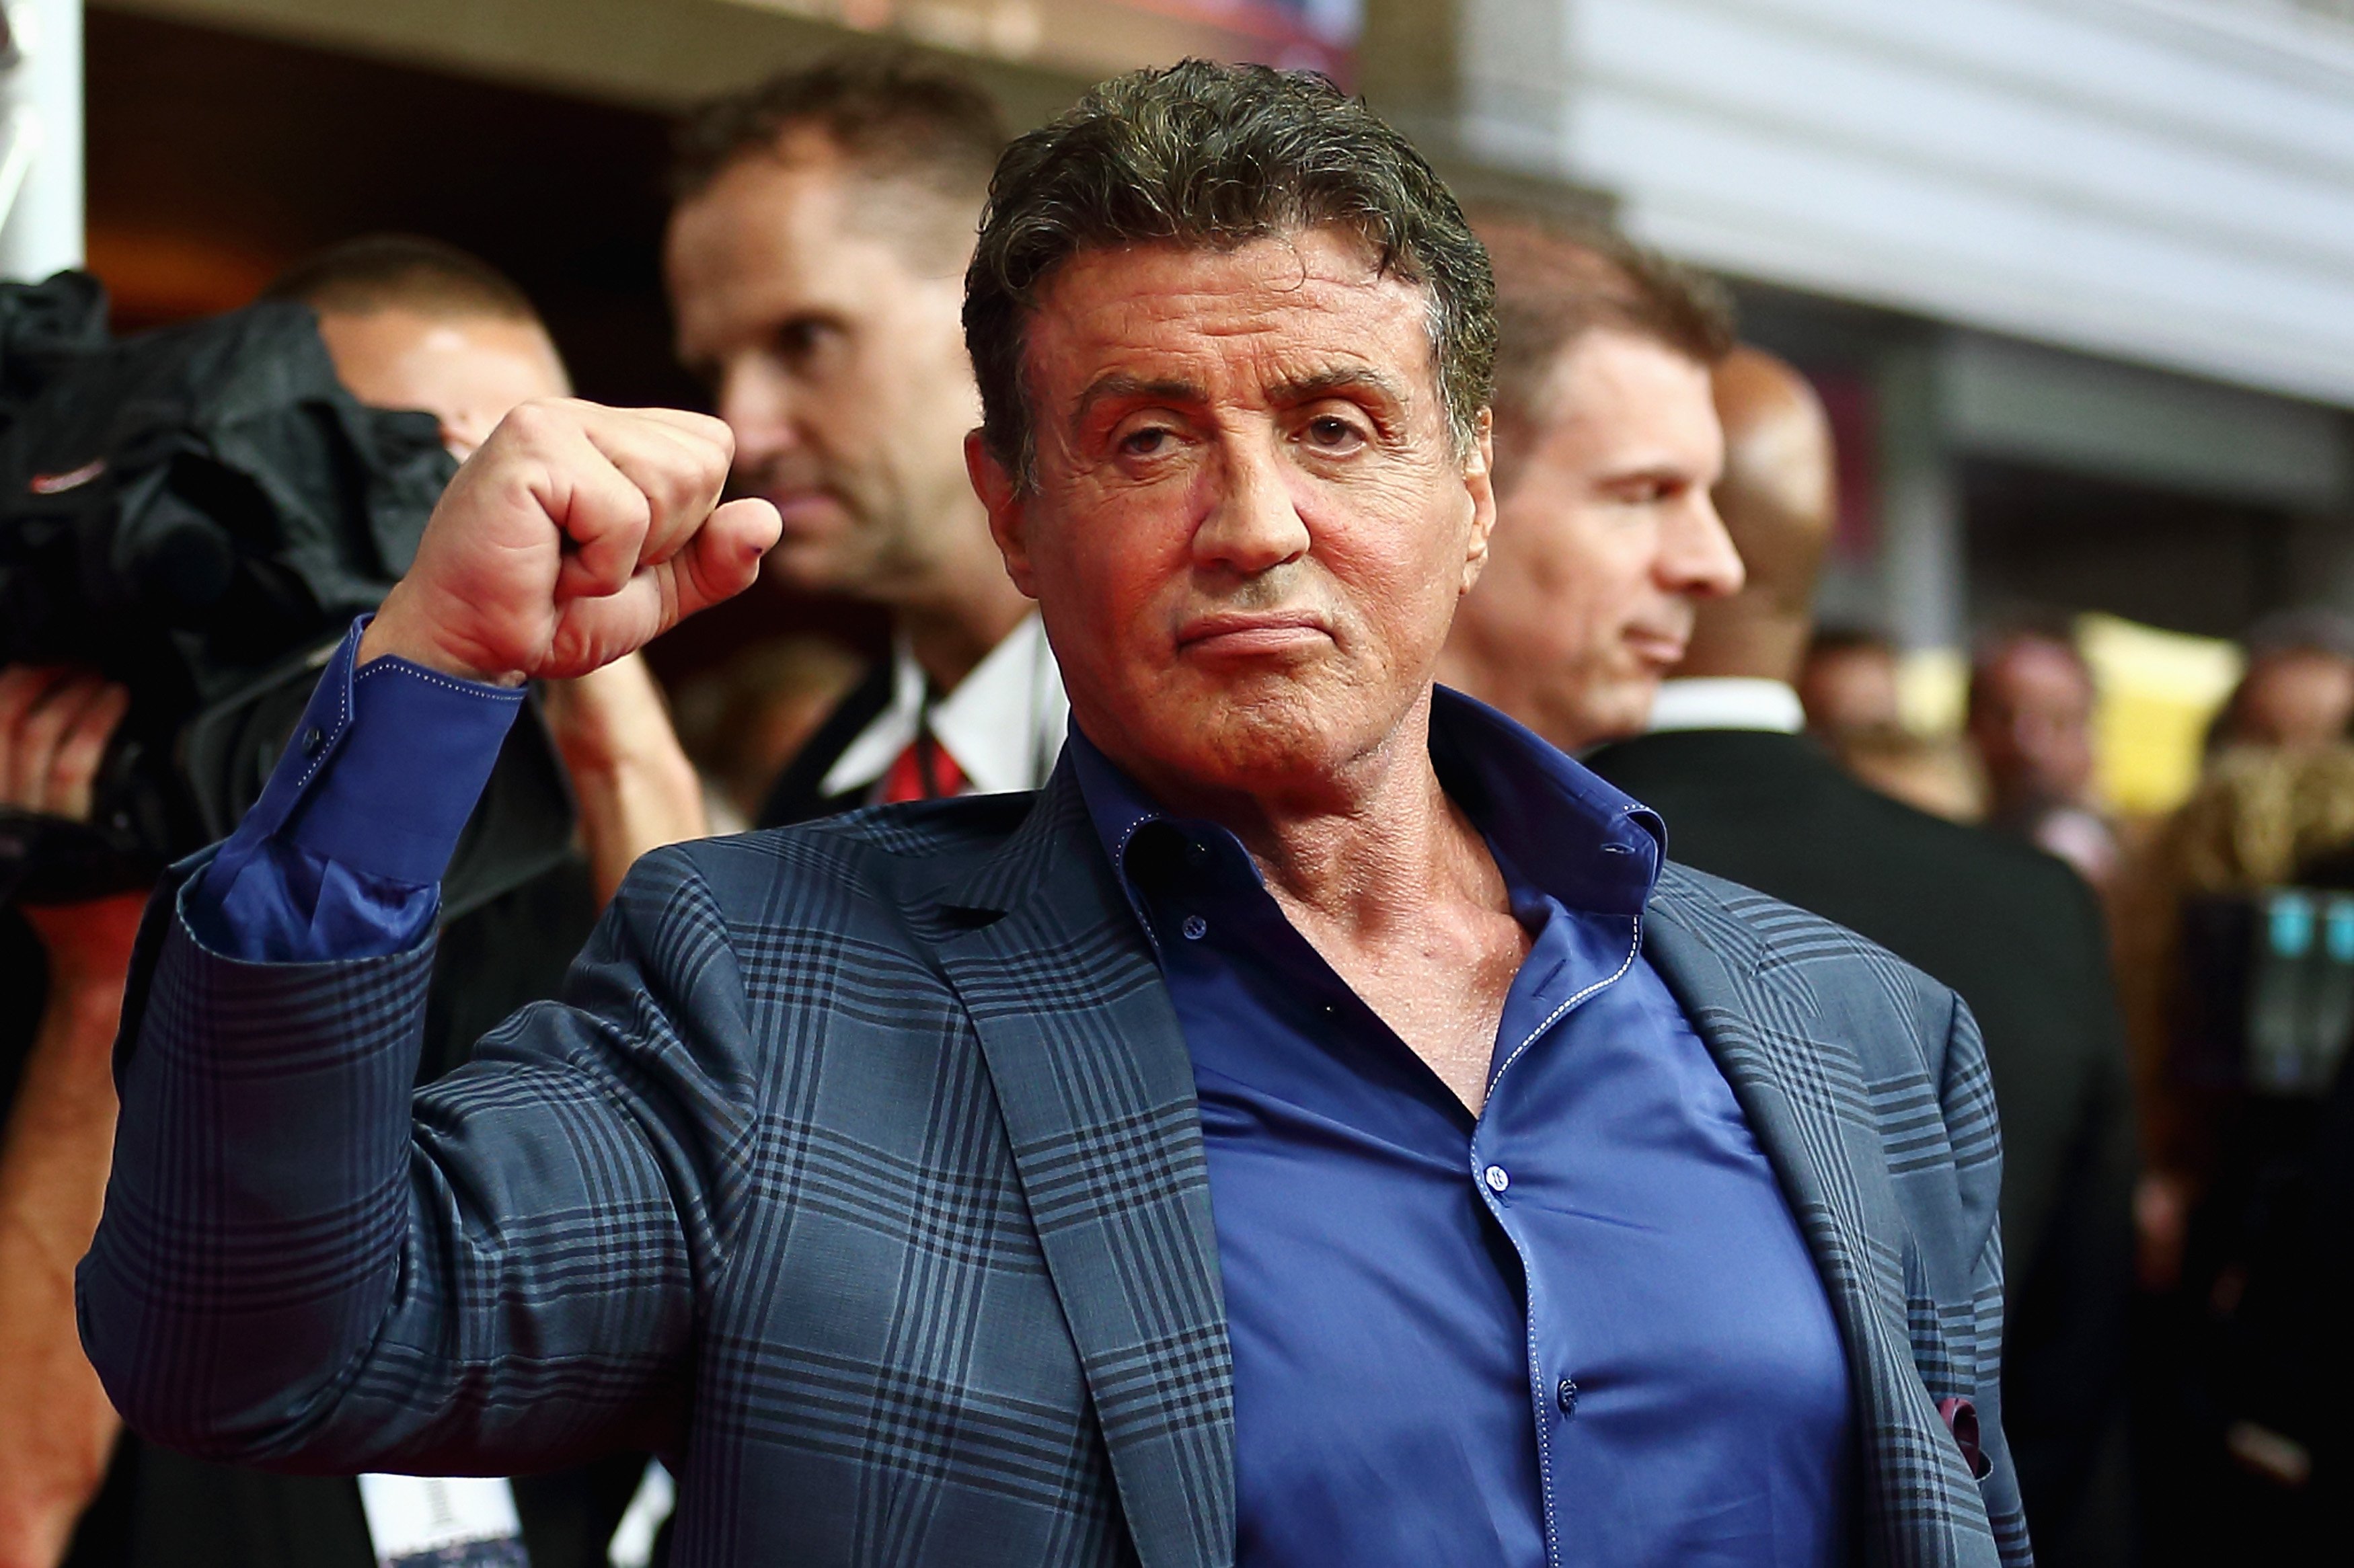 Sylvester Stallone on August 6, 2014 in Cologne, Germany. | Source: Getty Images